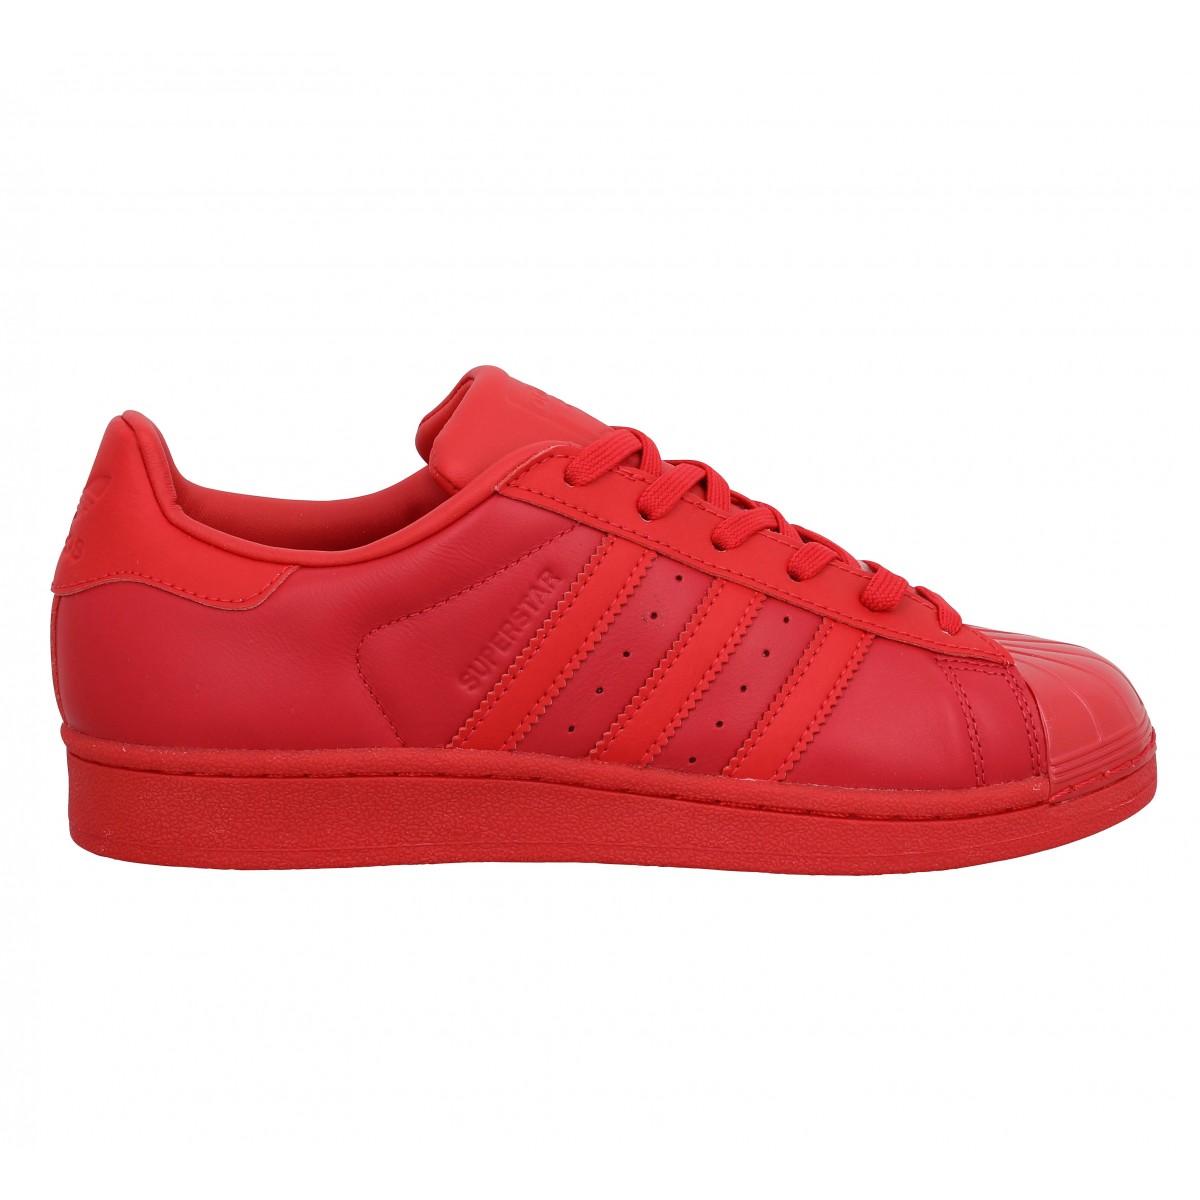 adidas rouge femme superstar Cheaper Than Retail Price> Buy ...